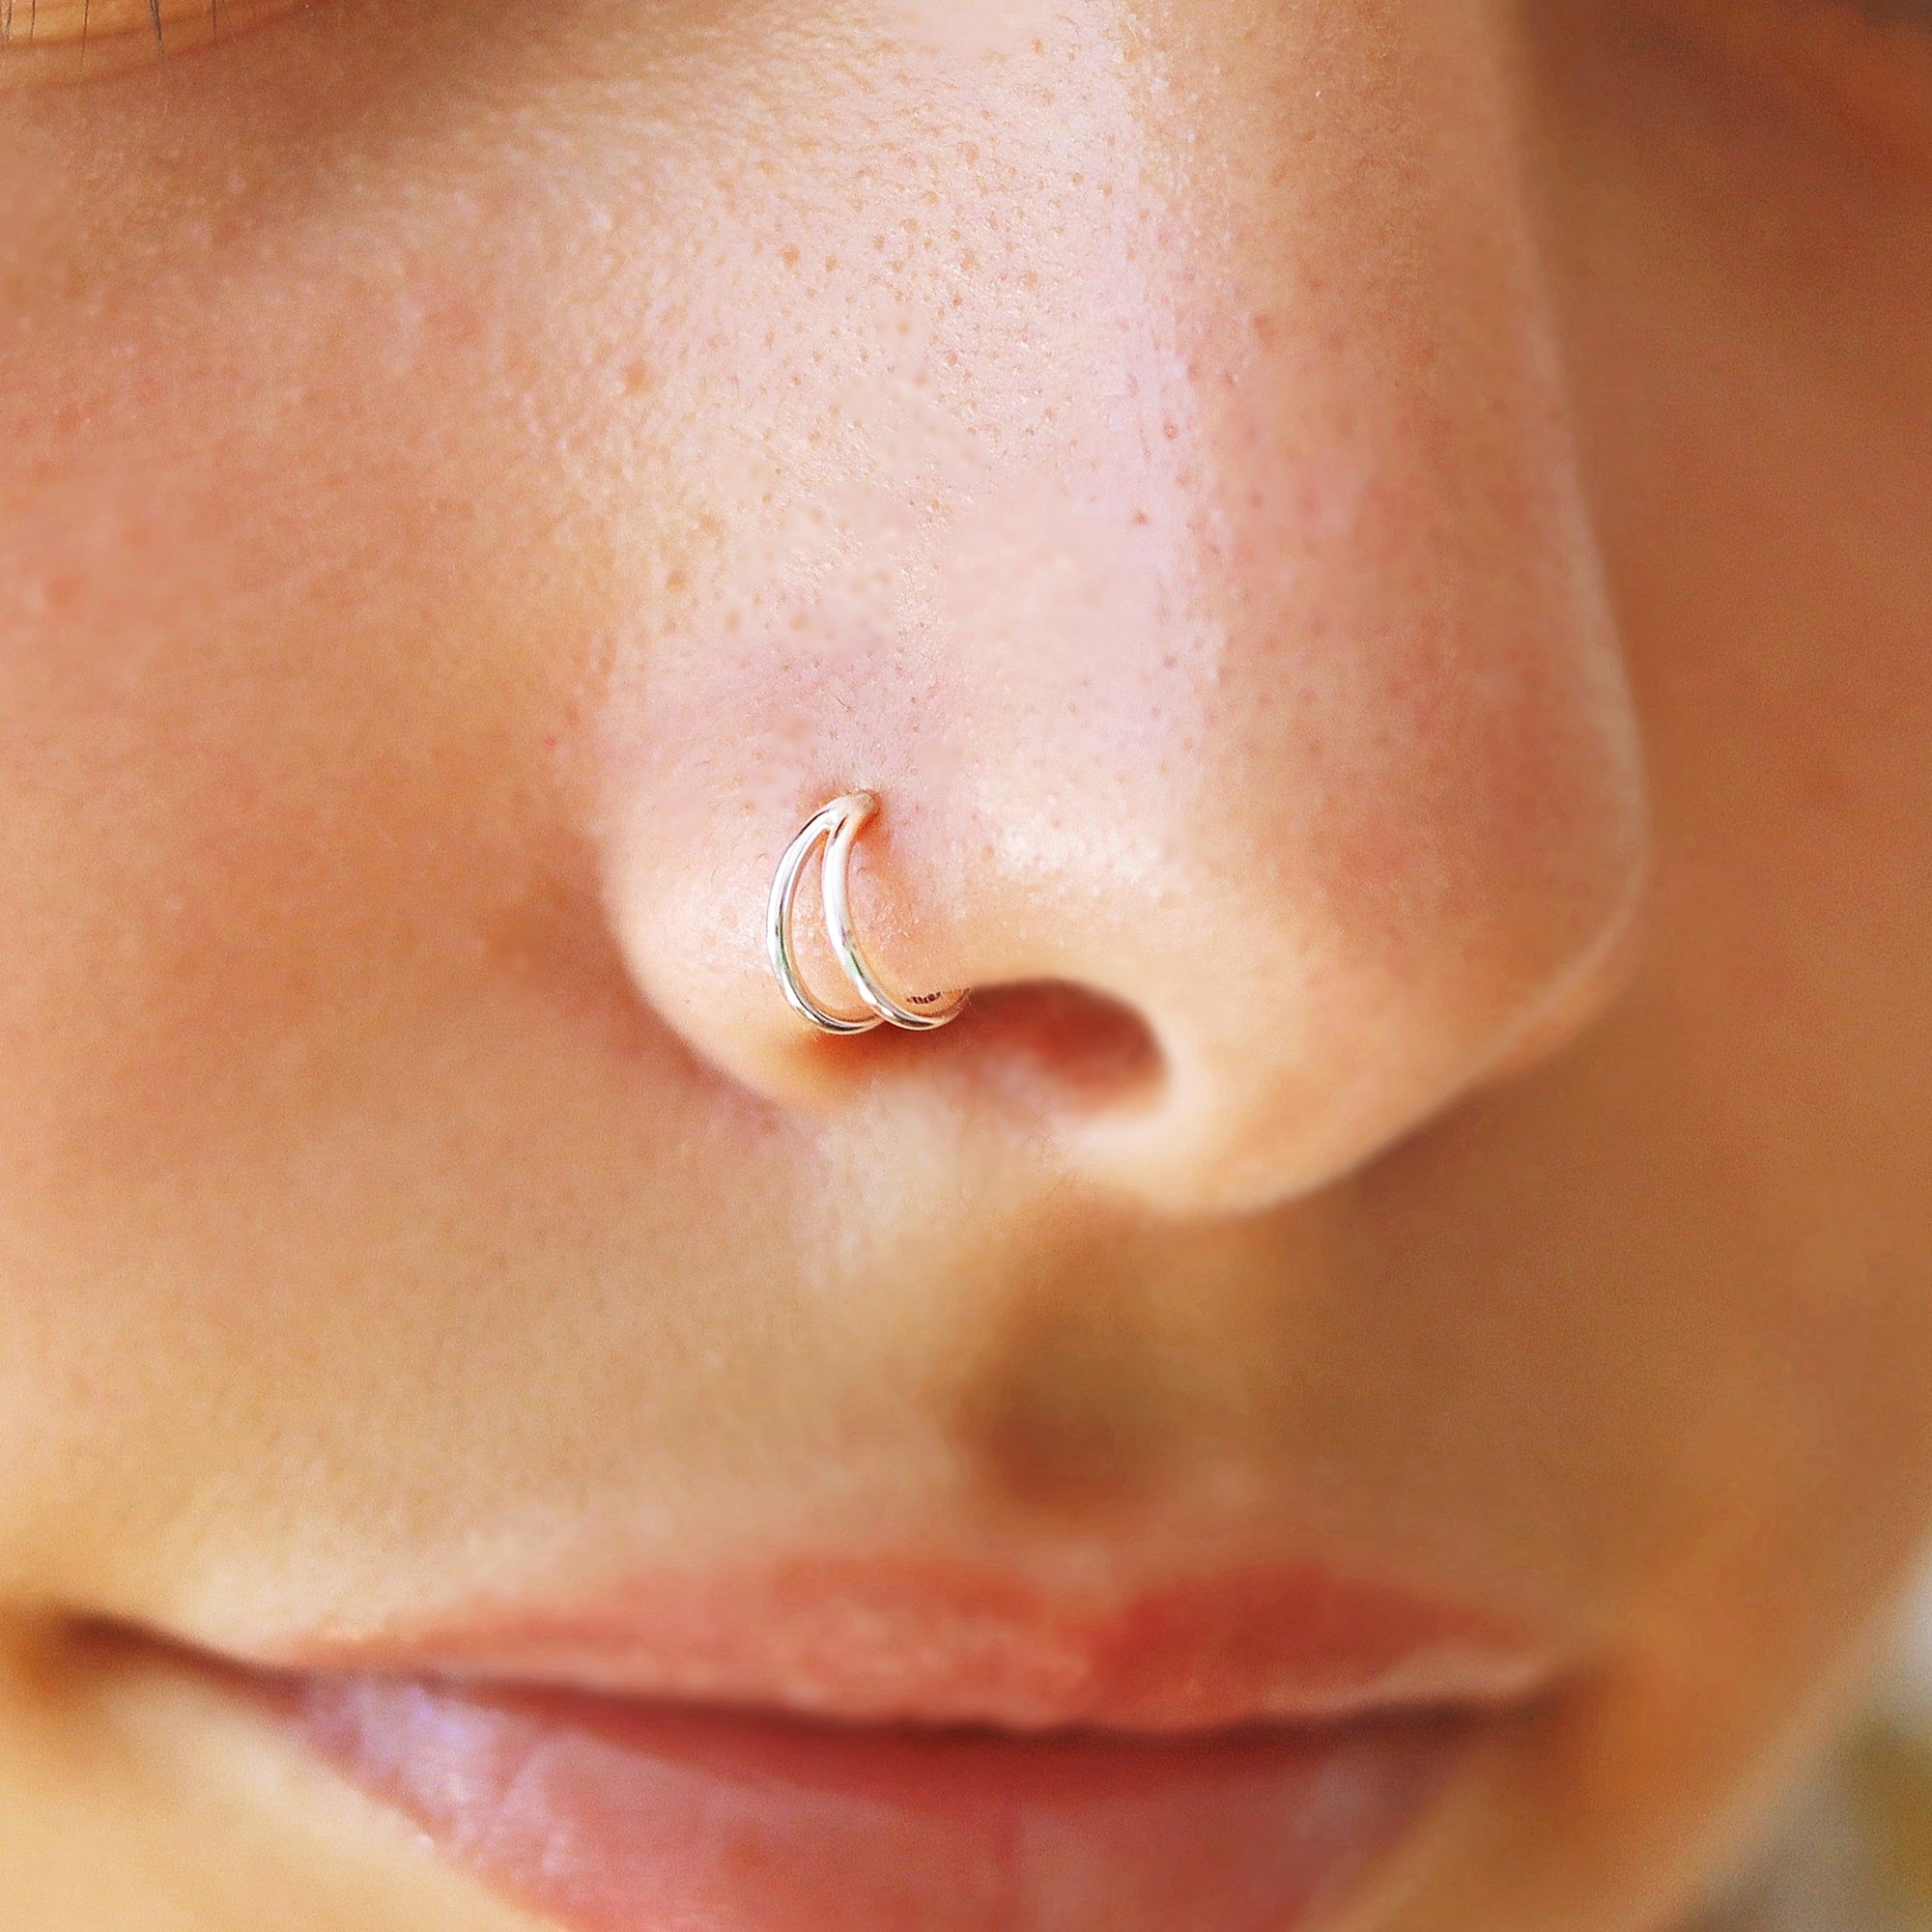 Double Nose Ring Hoop, Sterling Silver Nose Ring - TinyBox Jewelry